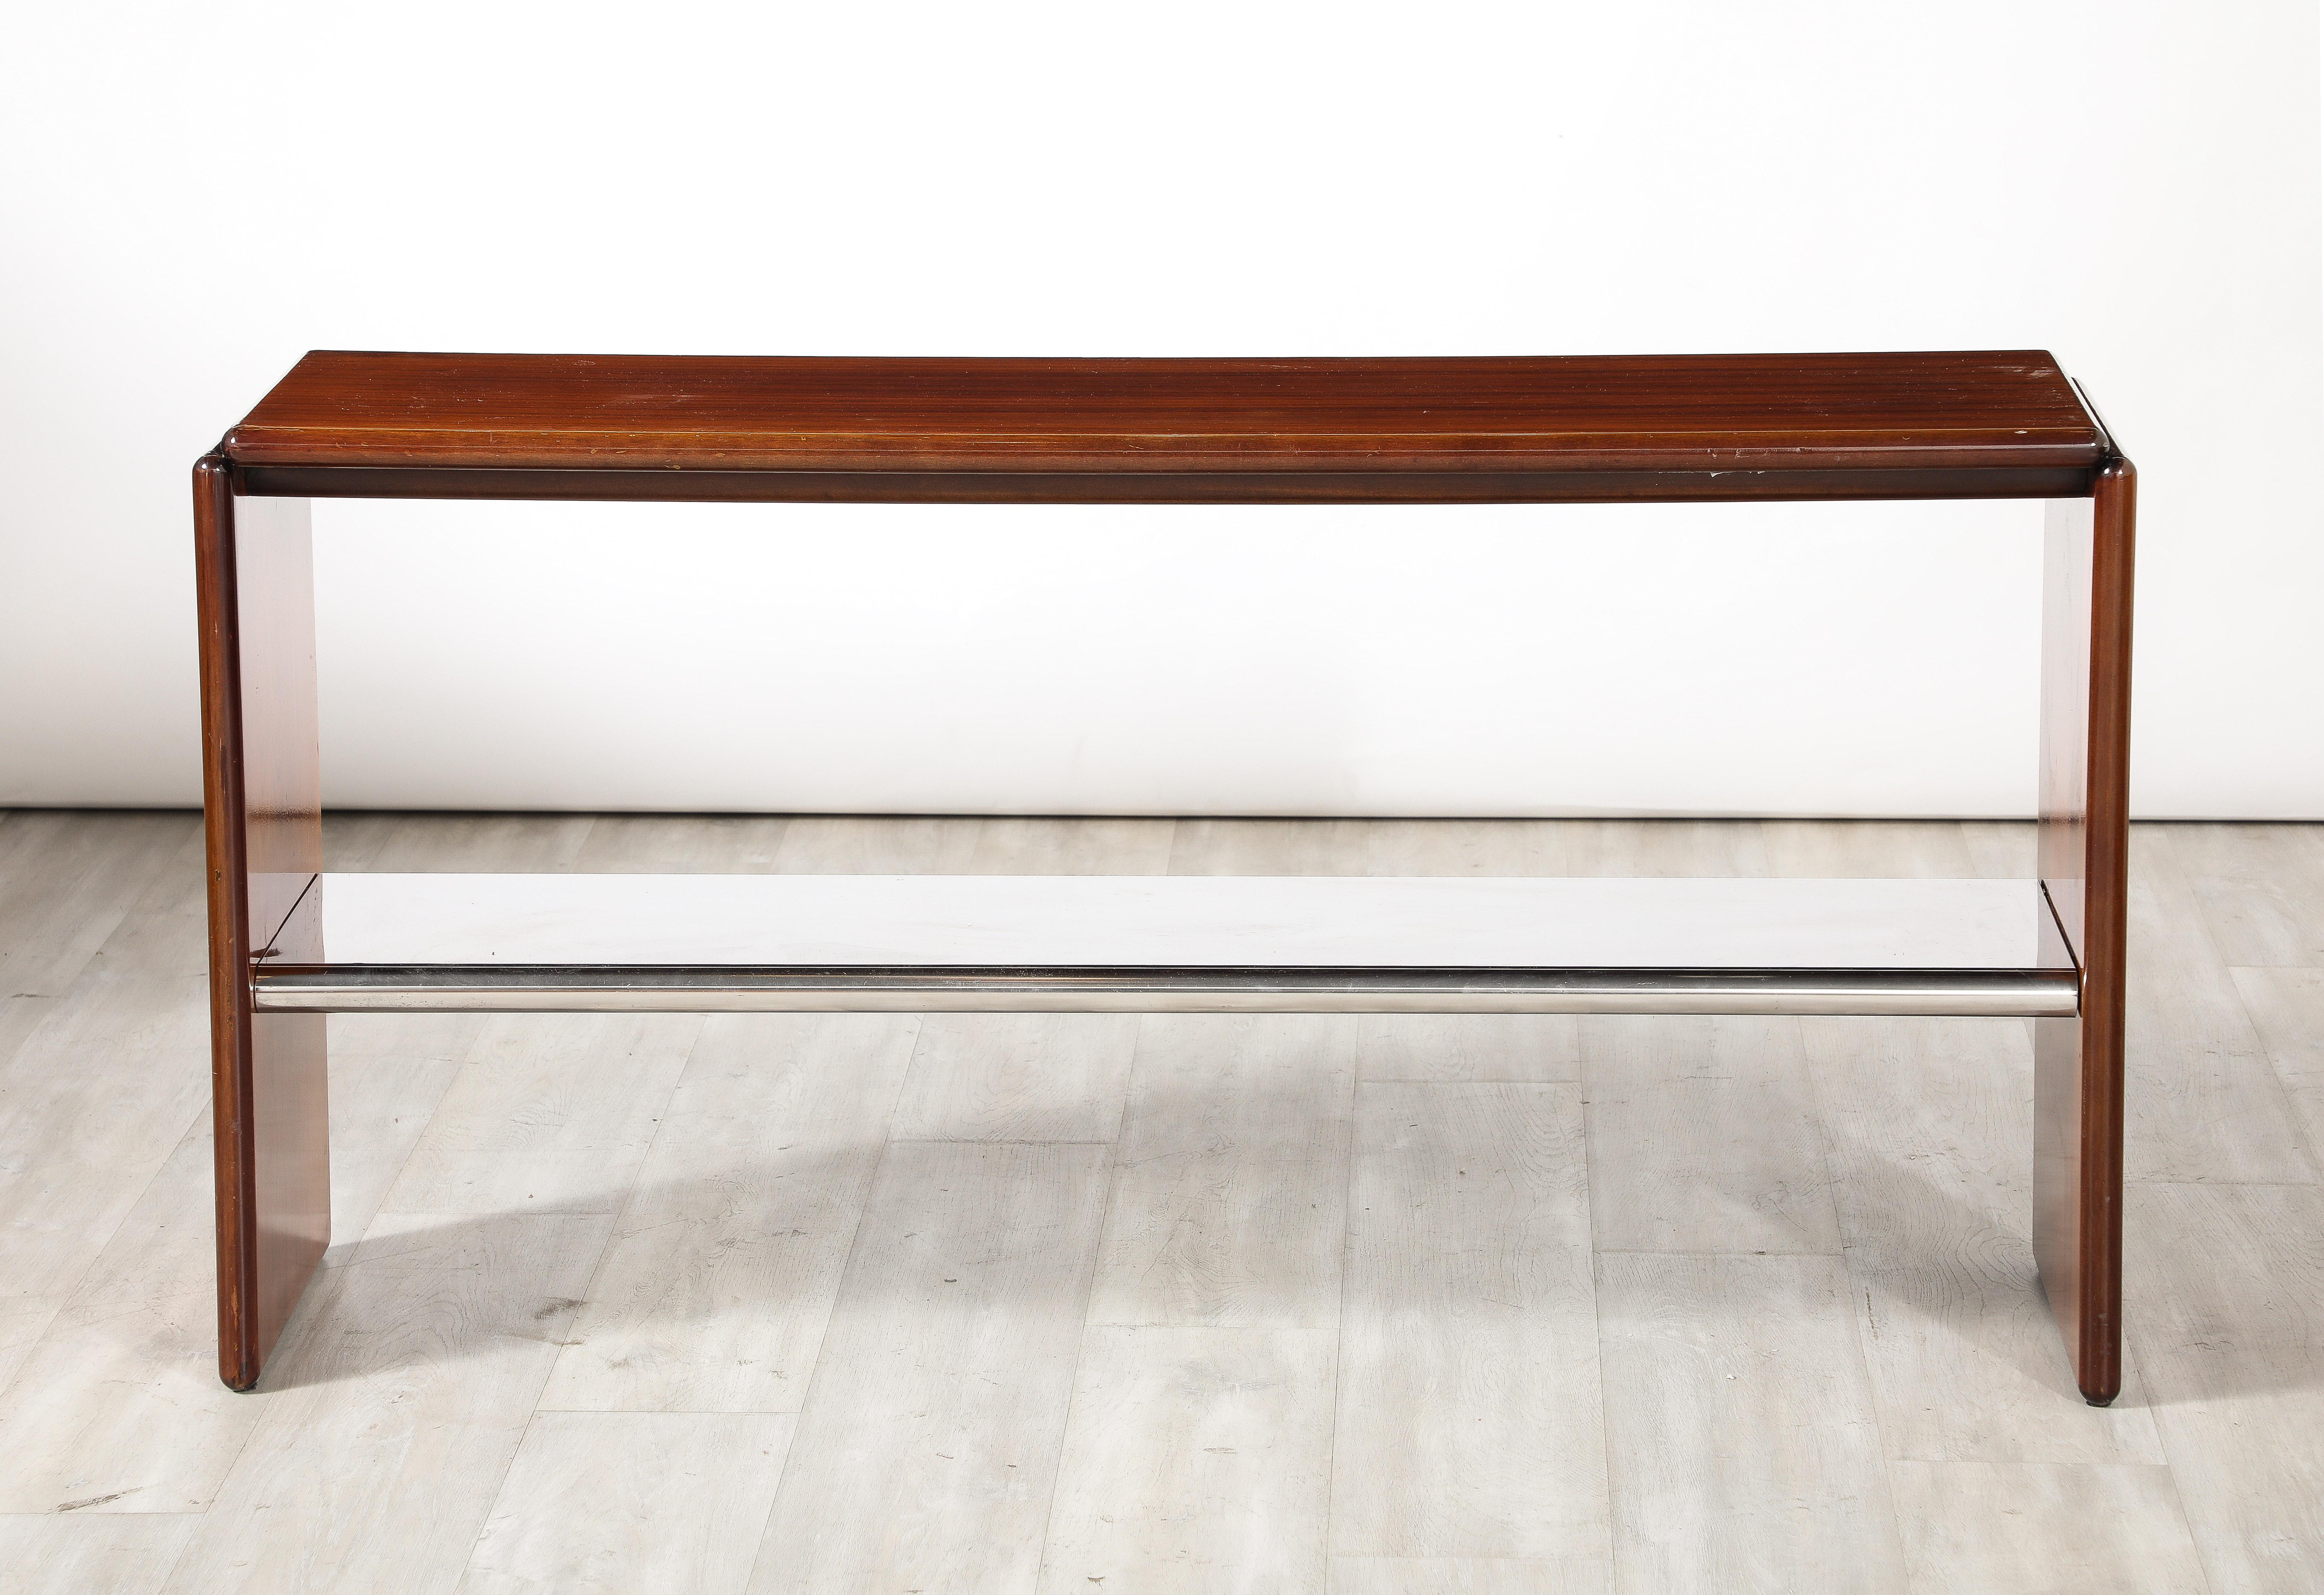 Mid-20th Century Italian Modernist Wood and Chrome Console Table, Italy, circa 1960 For Sale